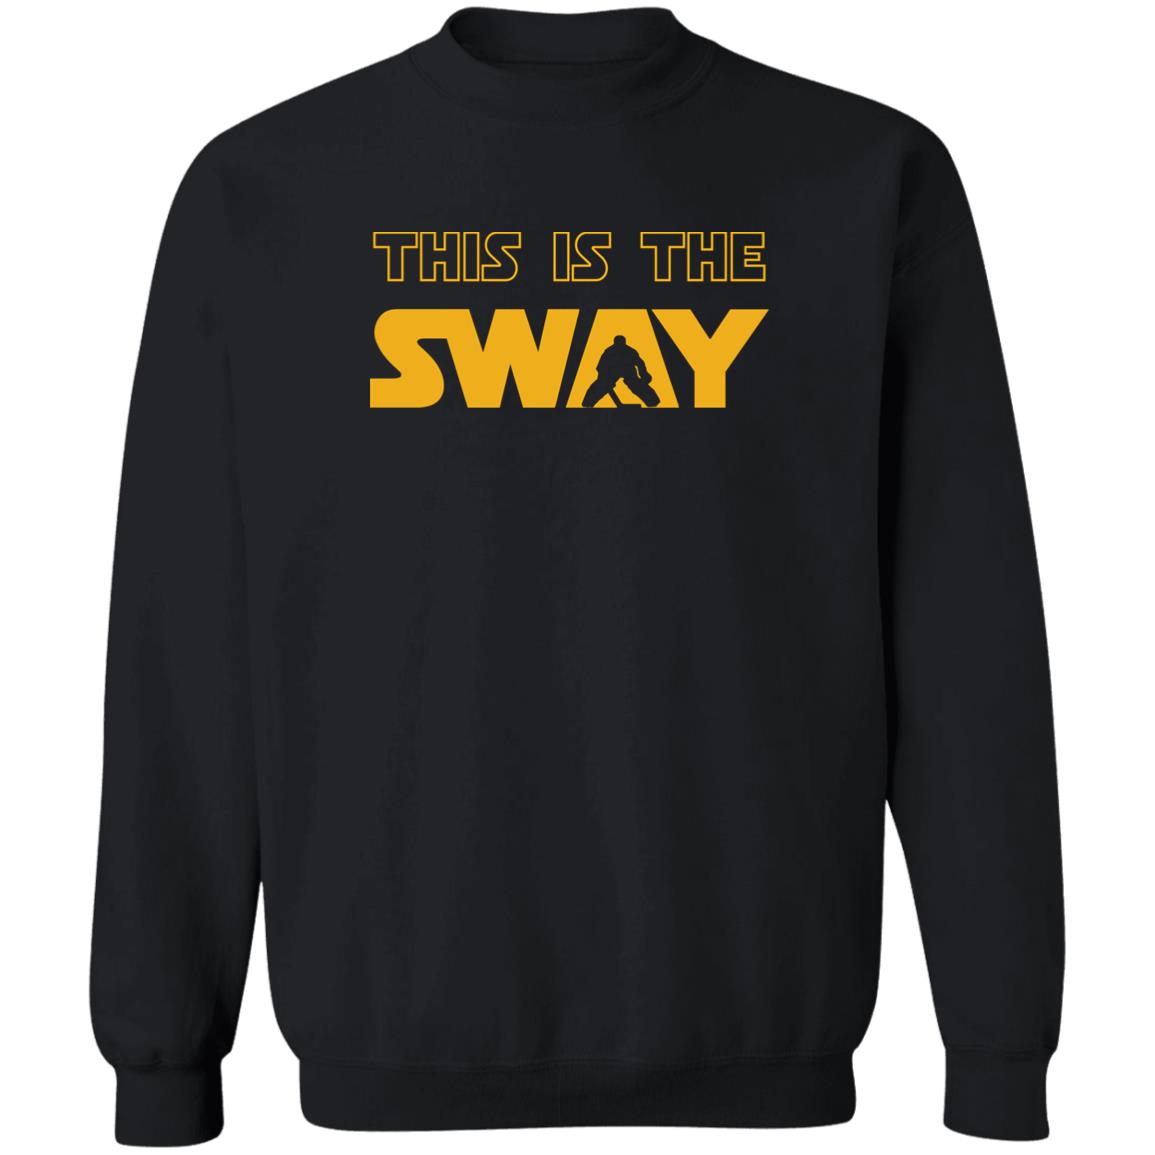 This Is The Sway Shirt 2